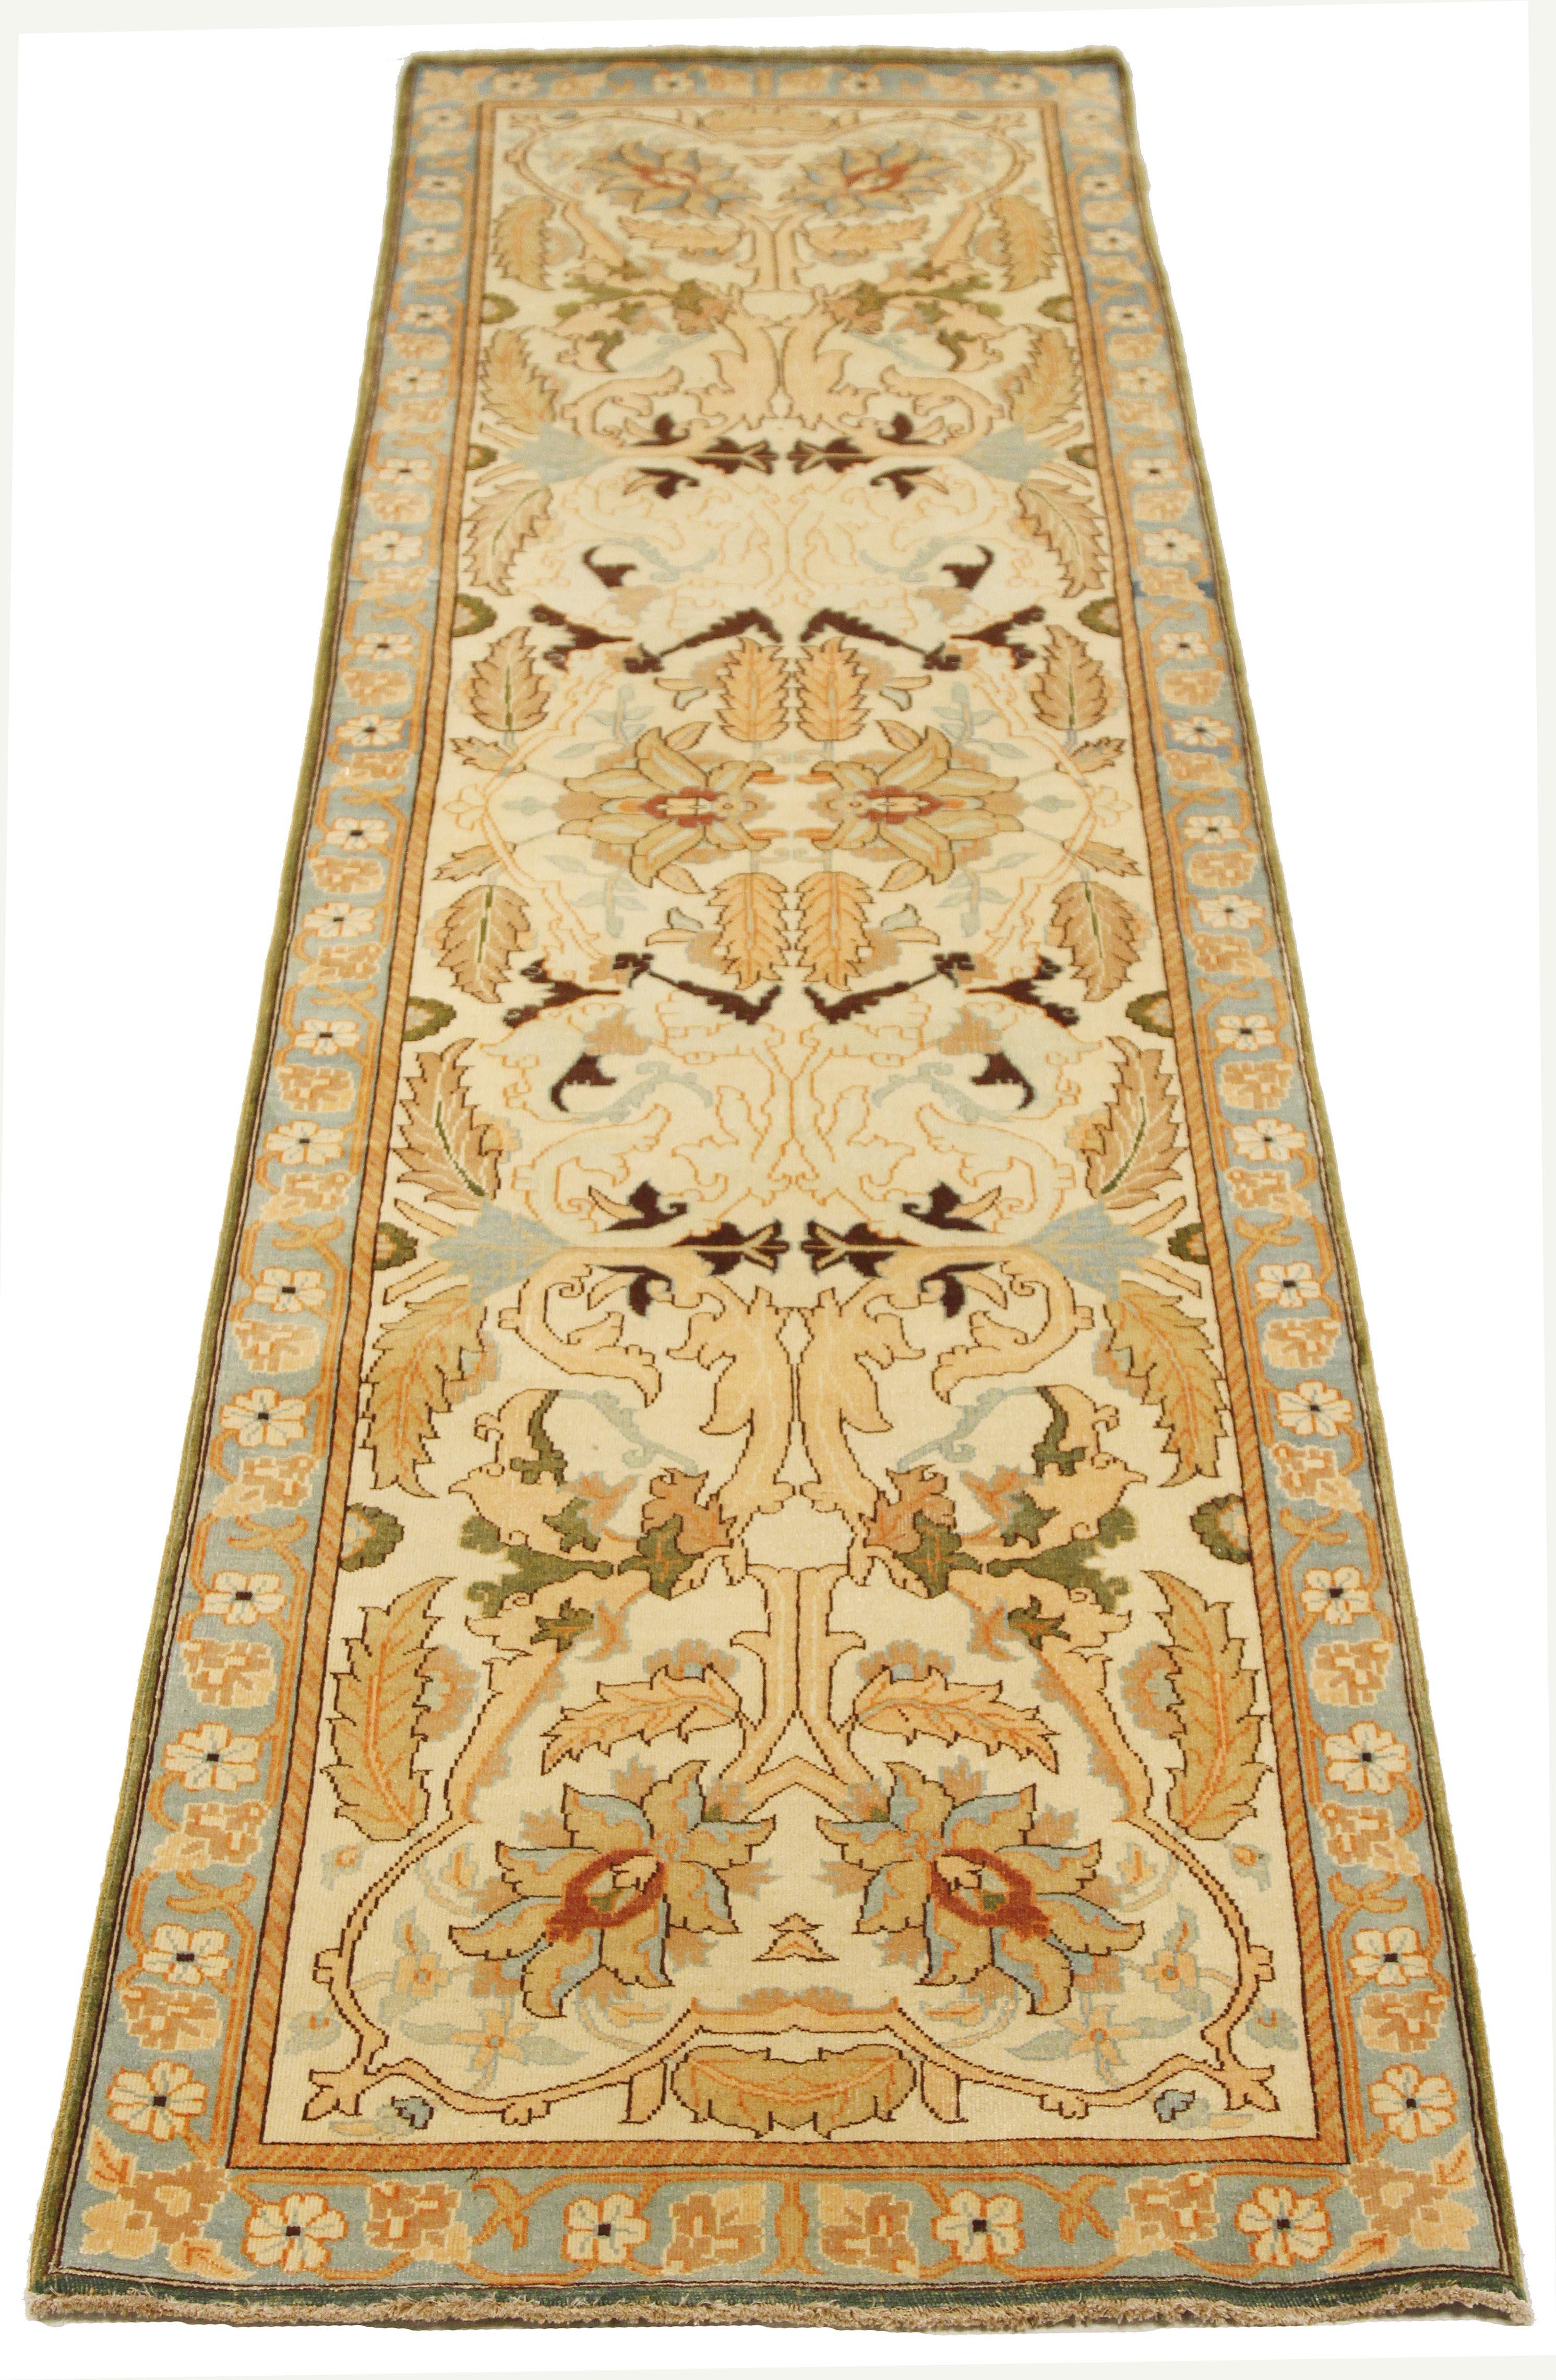 Antique Turkish rug handwoven from the finest sheep’s wool and colored with all-natural vegetable dyes that are safe for humans and pets. It’s a traditional Tabriz weaving featuring a lovely ensemble of floral designs in gray and beige over an ivory